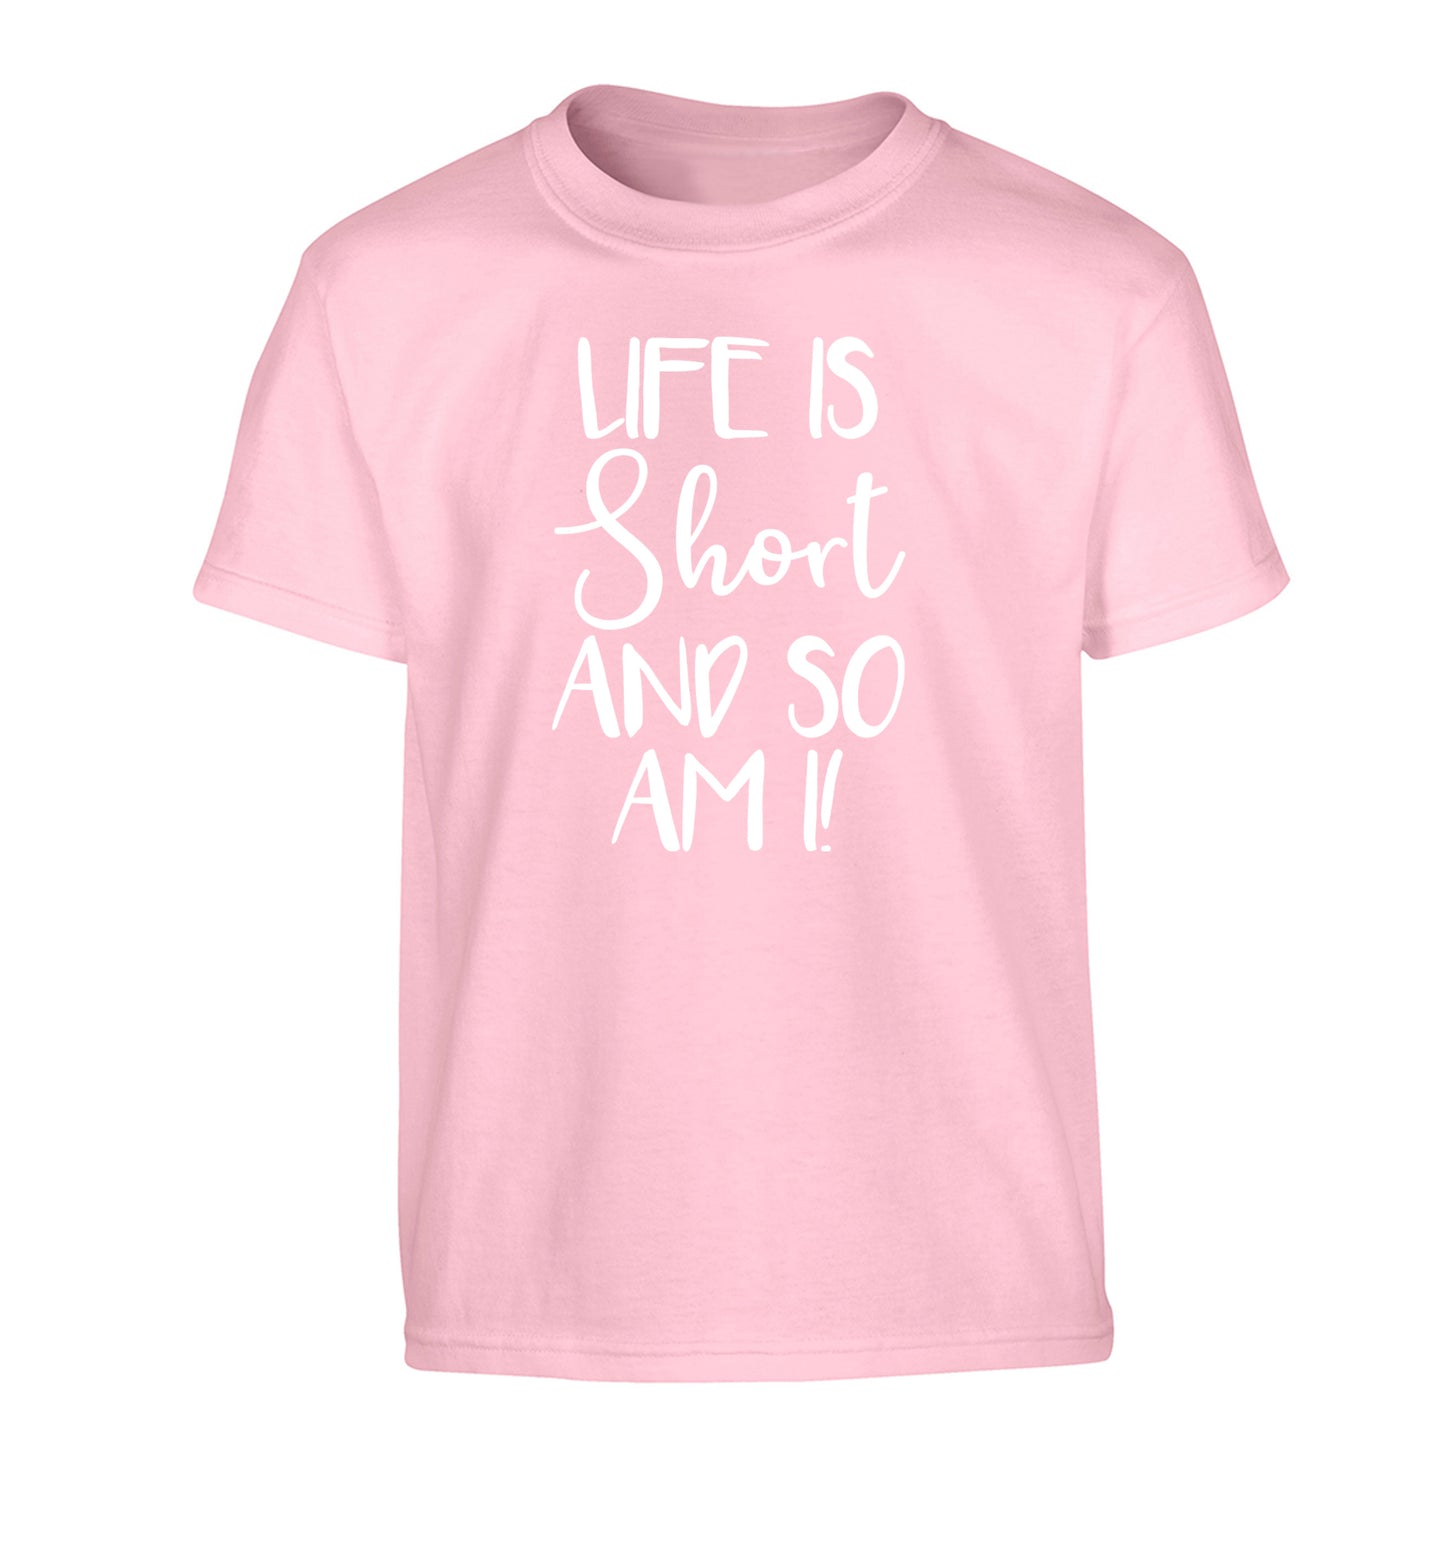 Life is short and so am I! Children's light pink Tshirt 12-13 Years